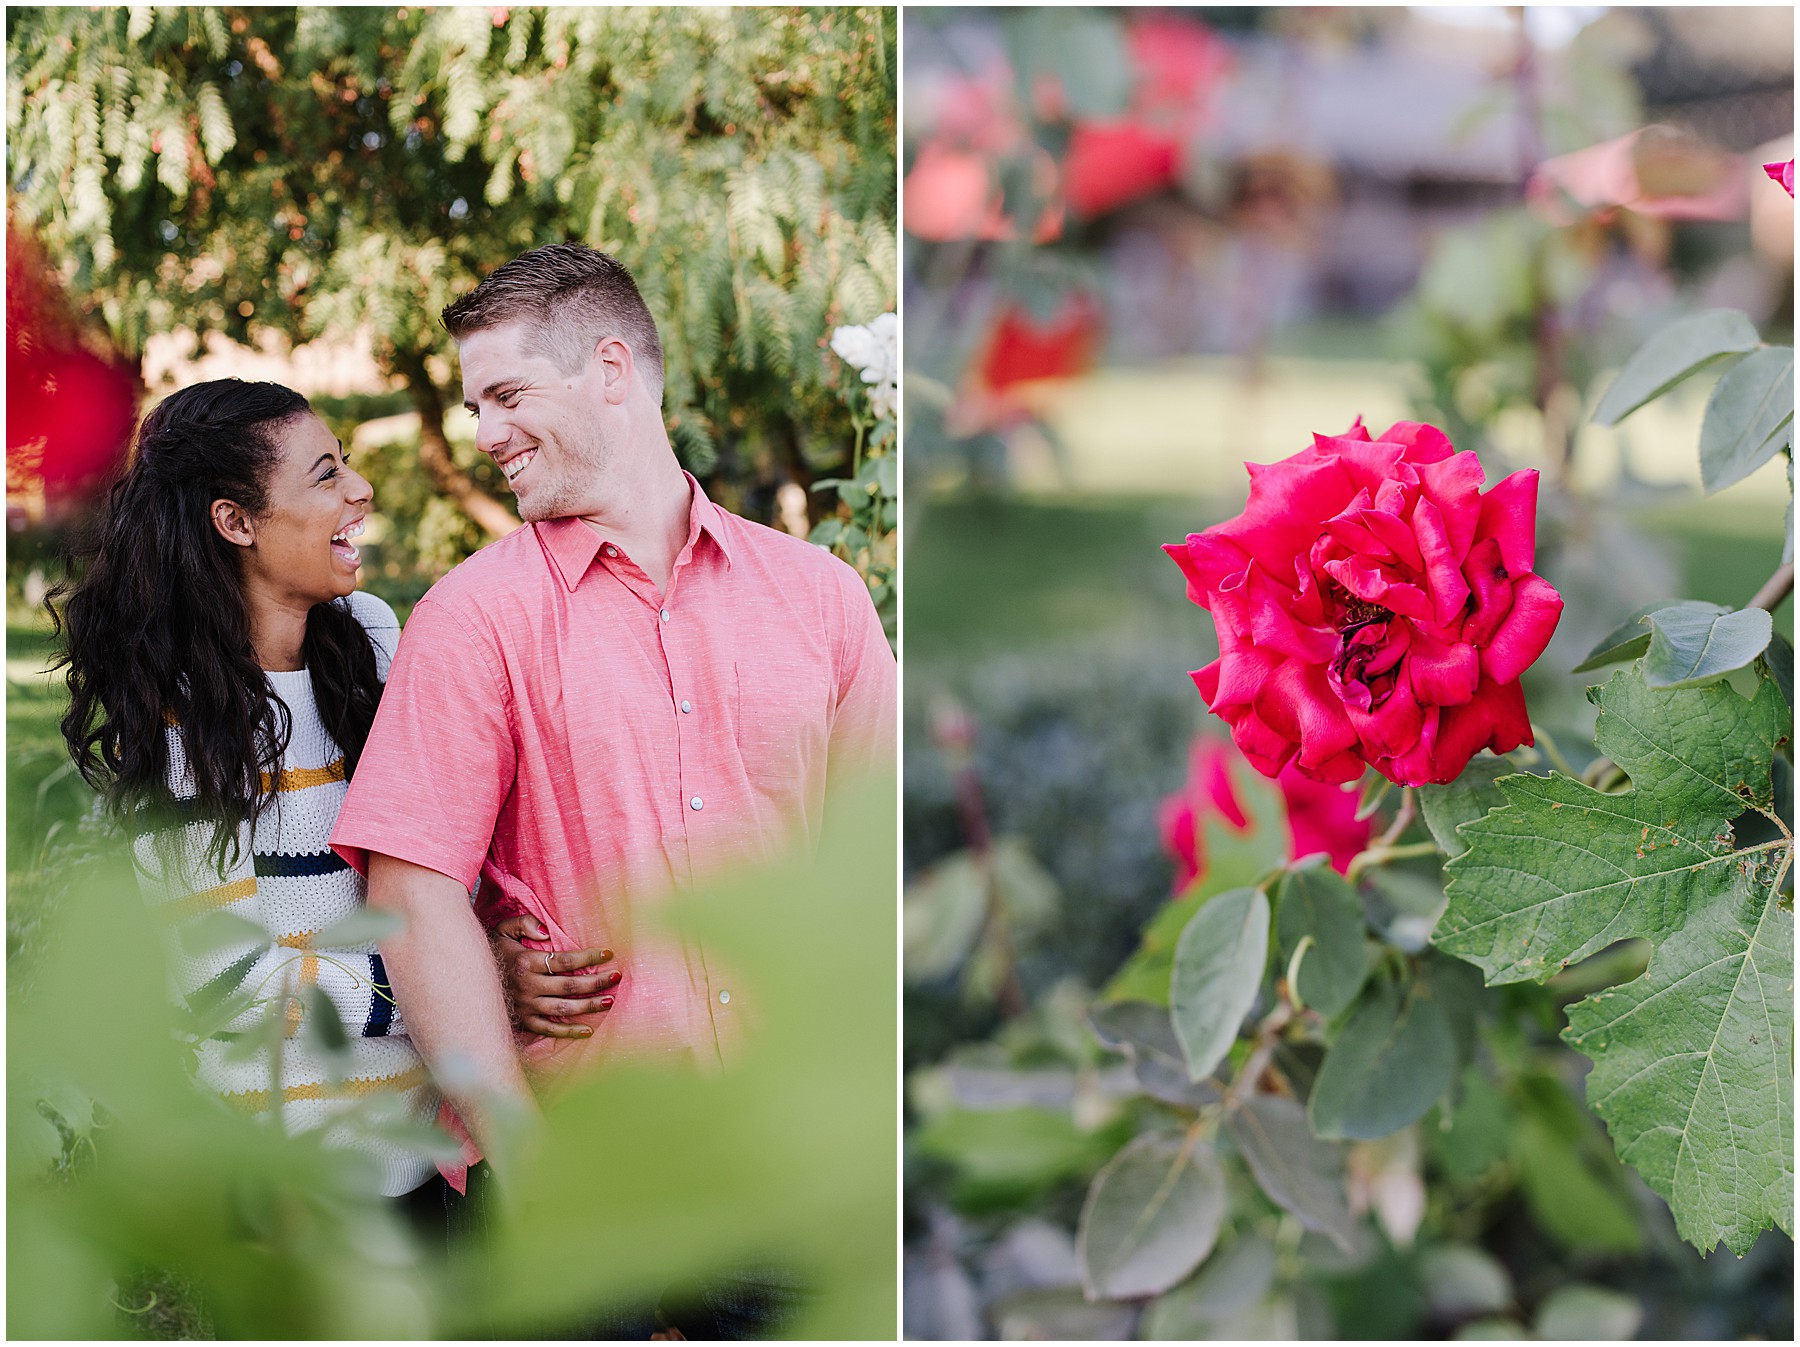 Still Water Winery Engagement Session in Paso Robles, California